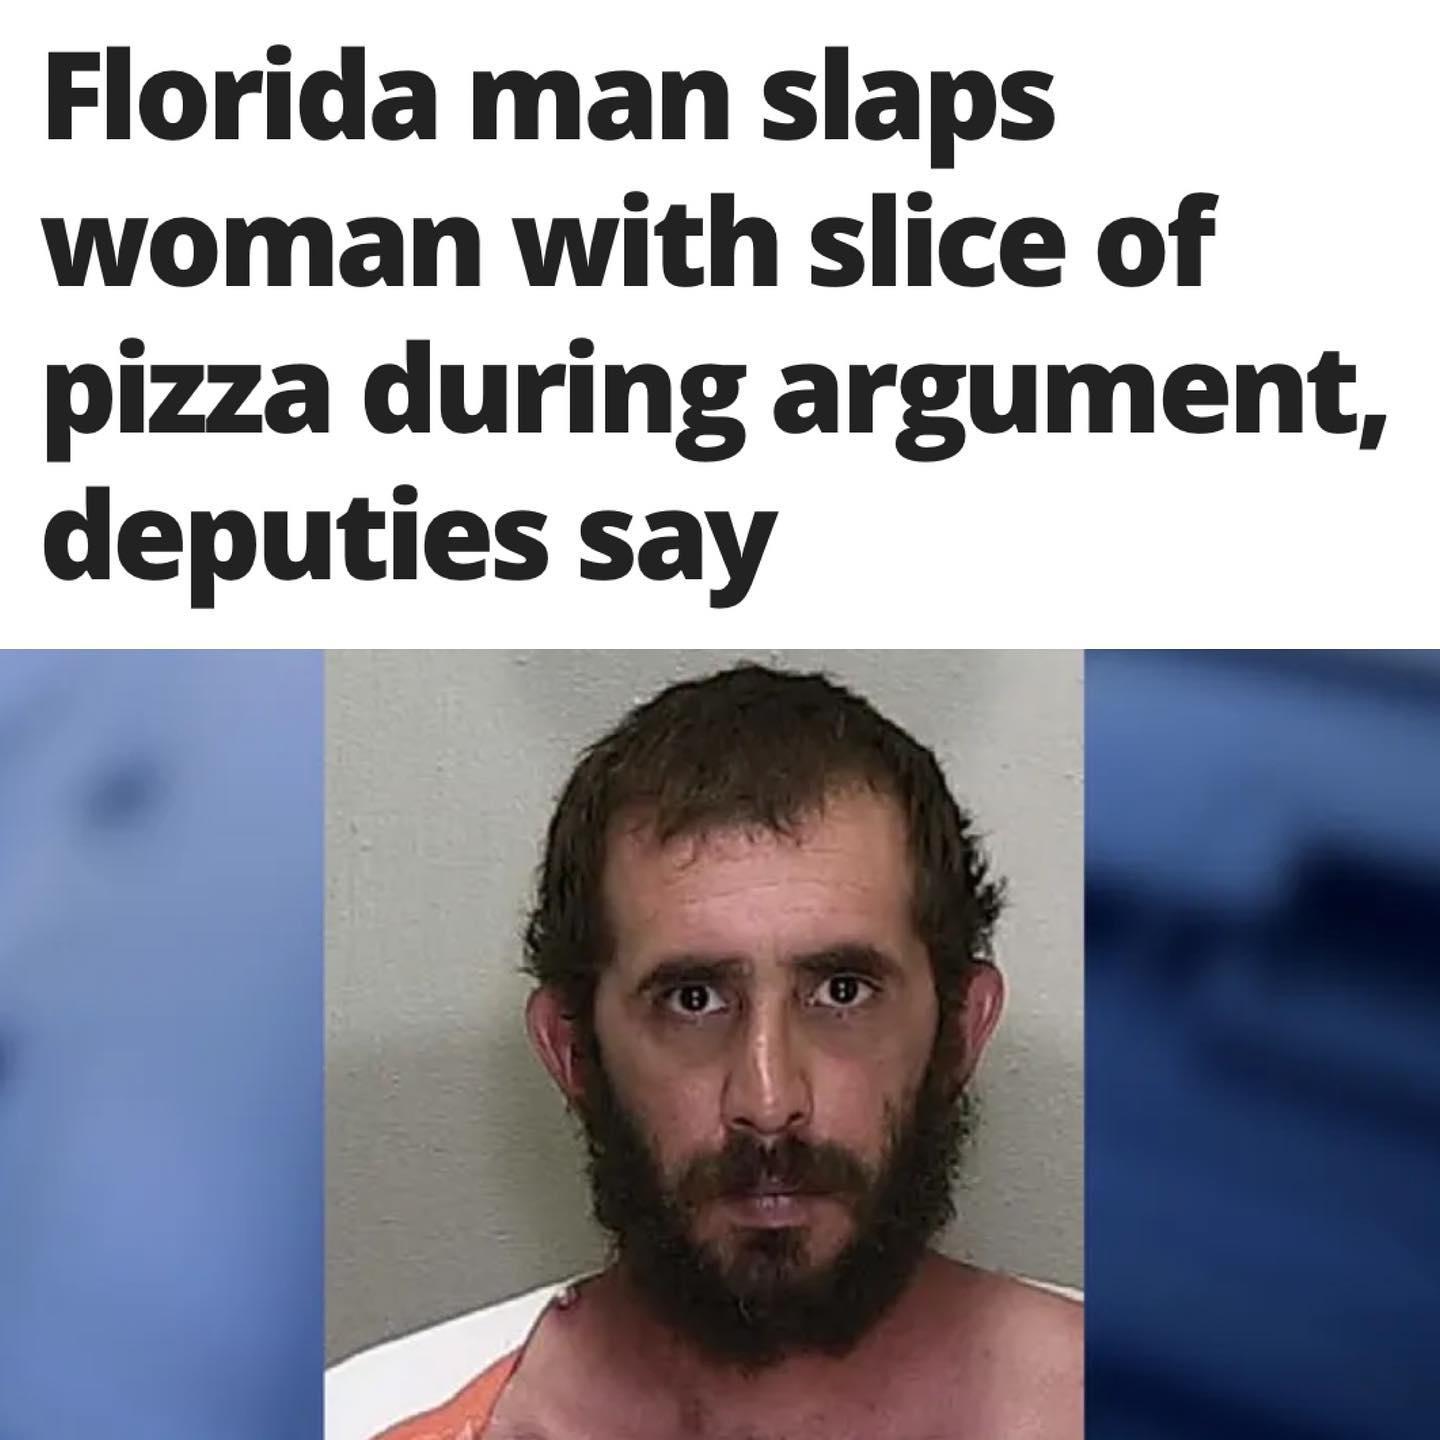 Here Are 5 of the Internet's Best Florida Man Memes - VisionViral.com